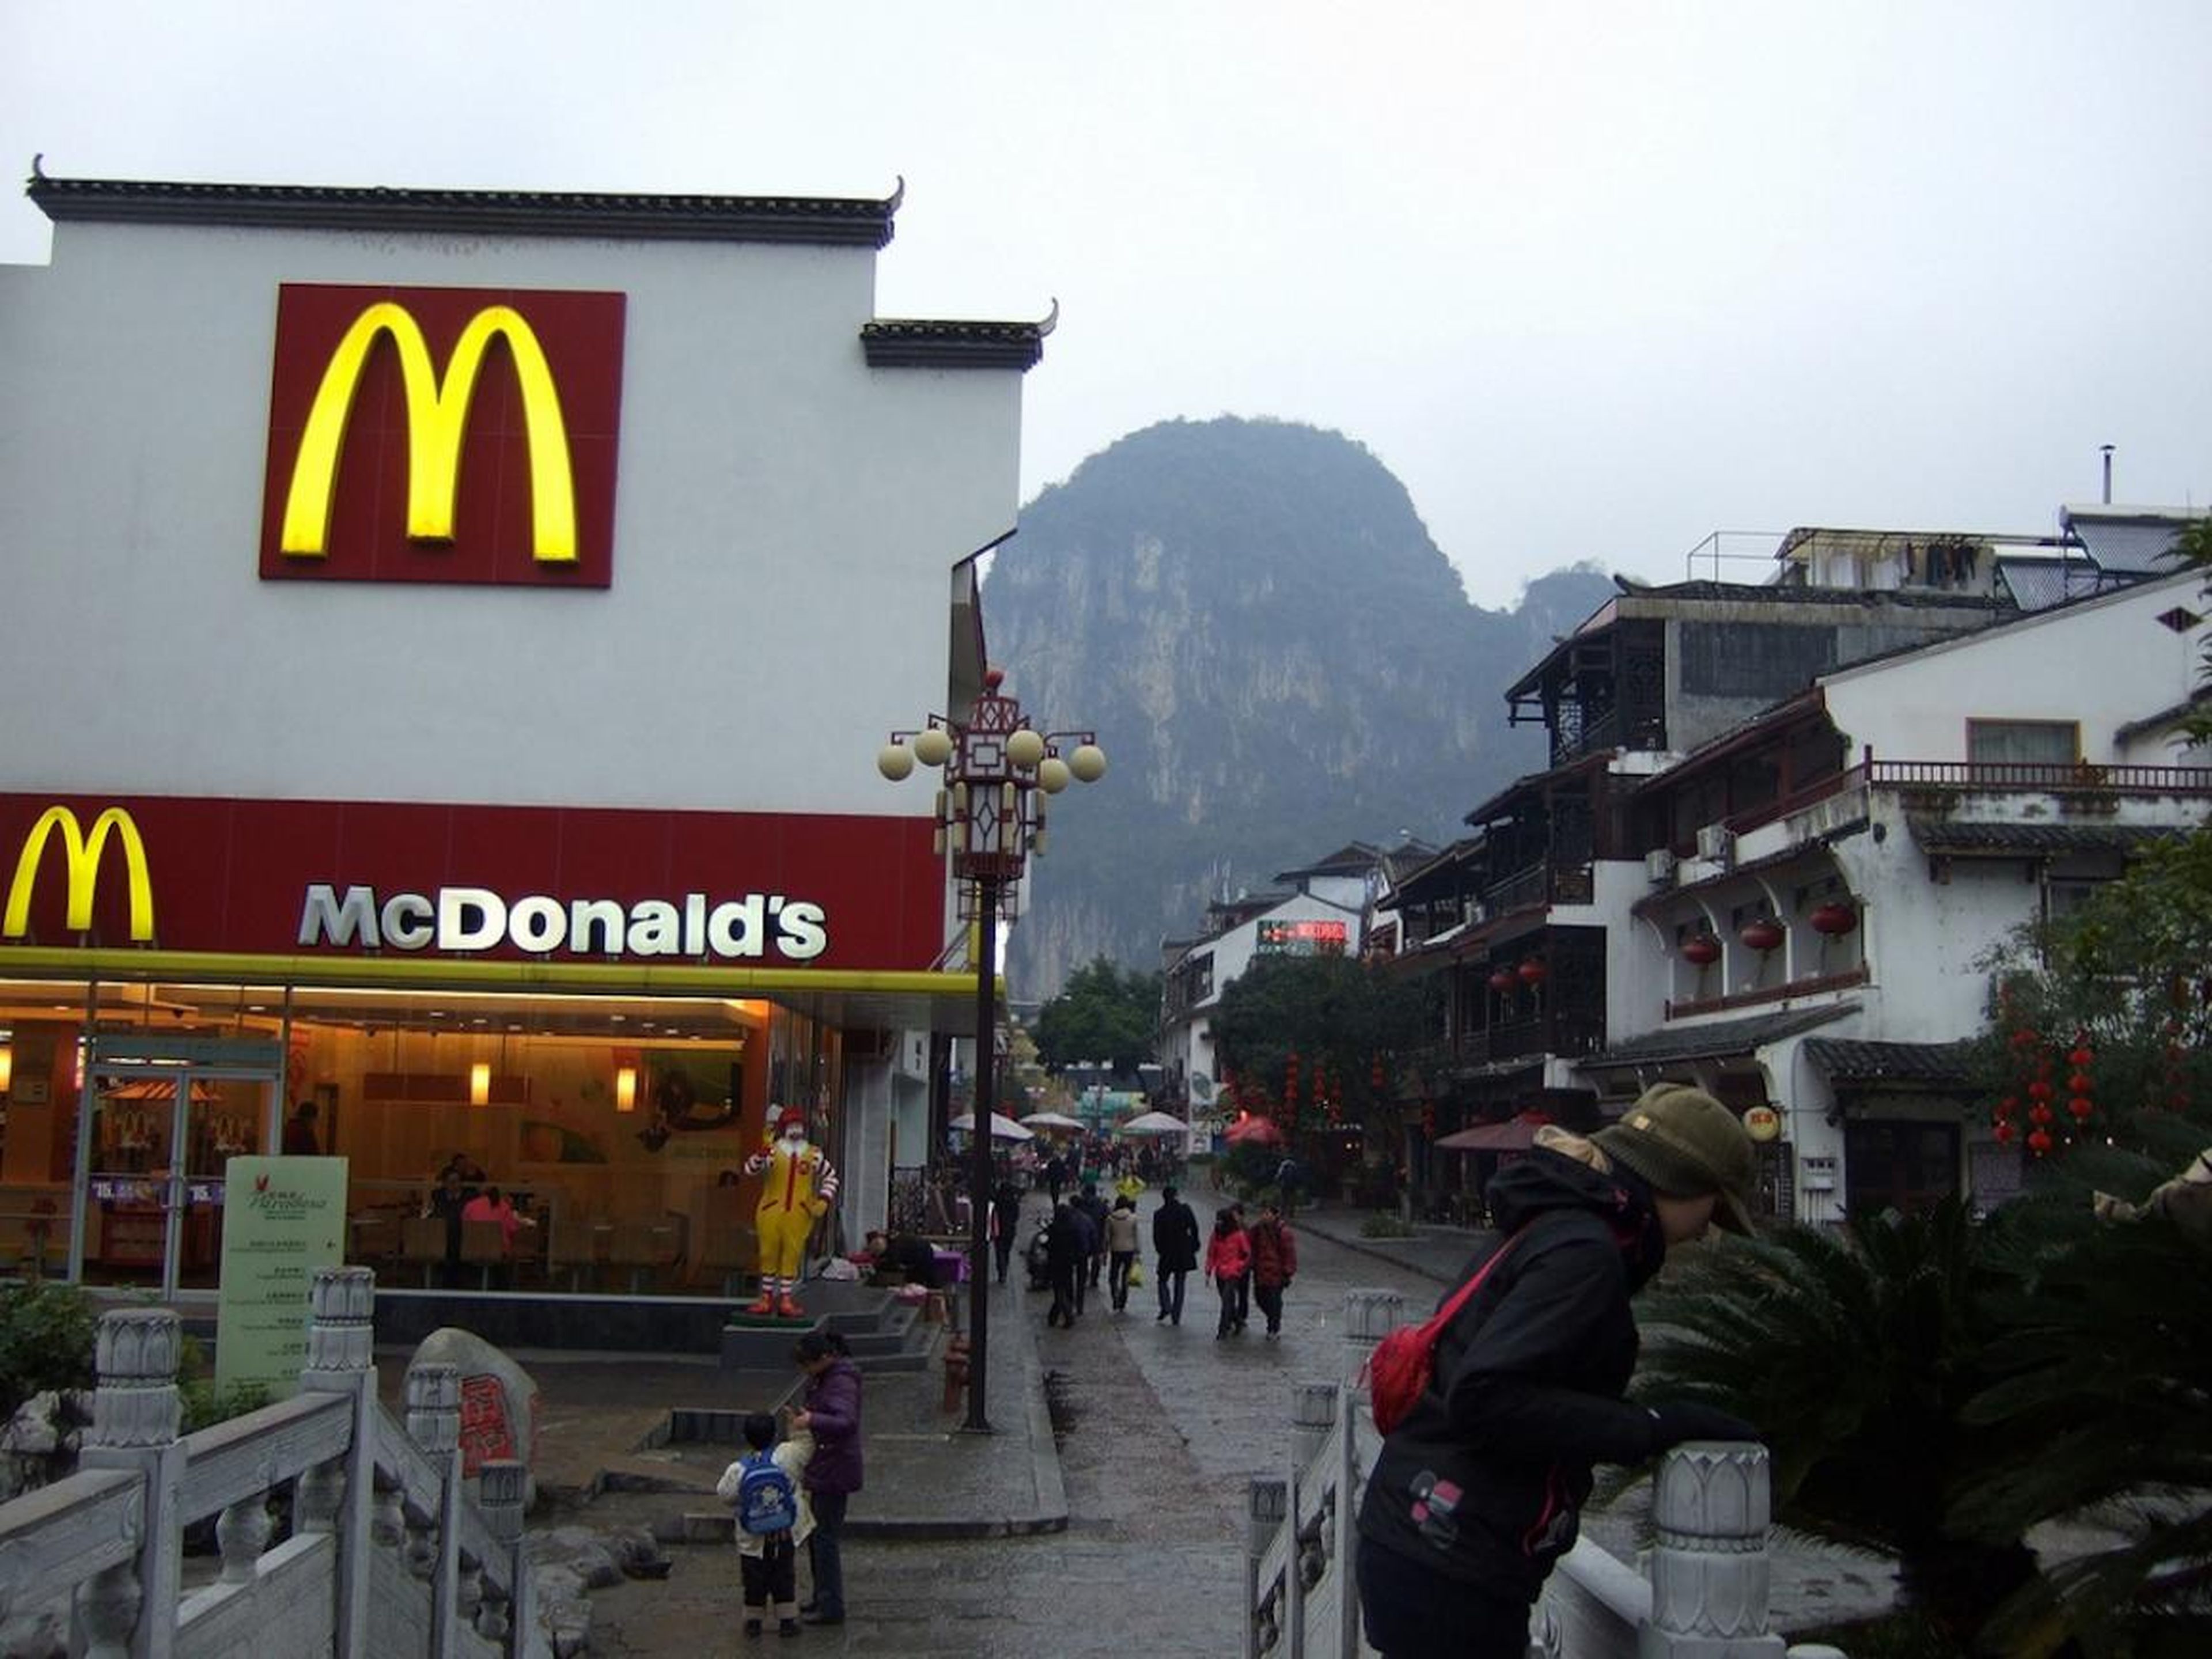 Here's another look at the mountainside McDonald's.